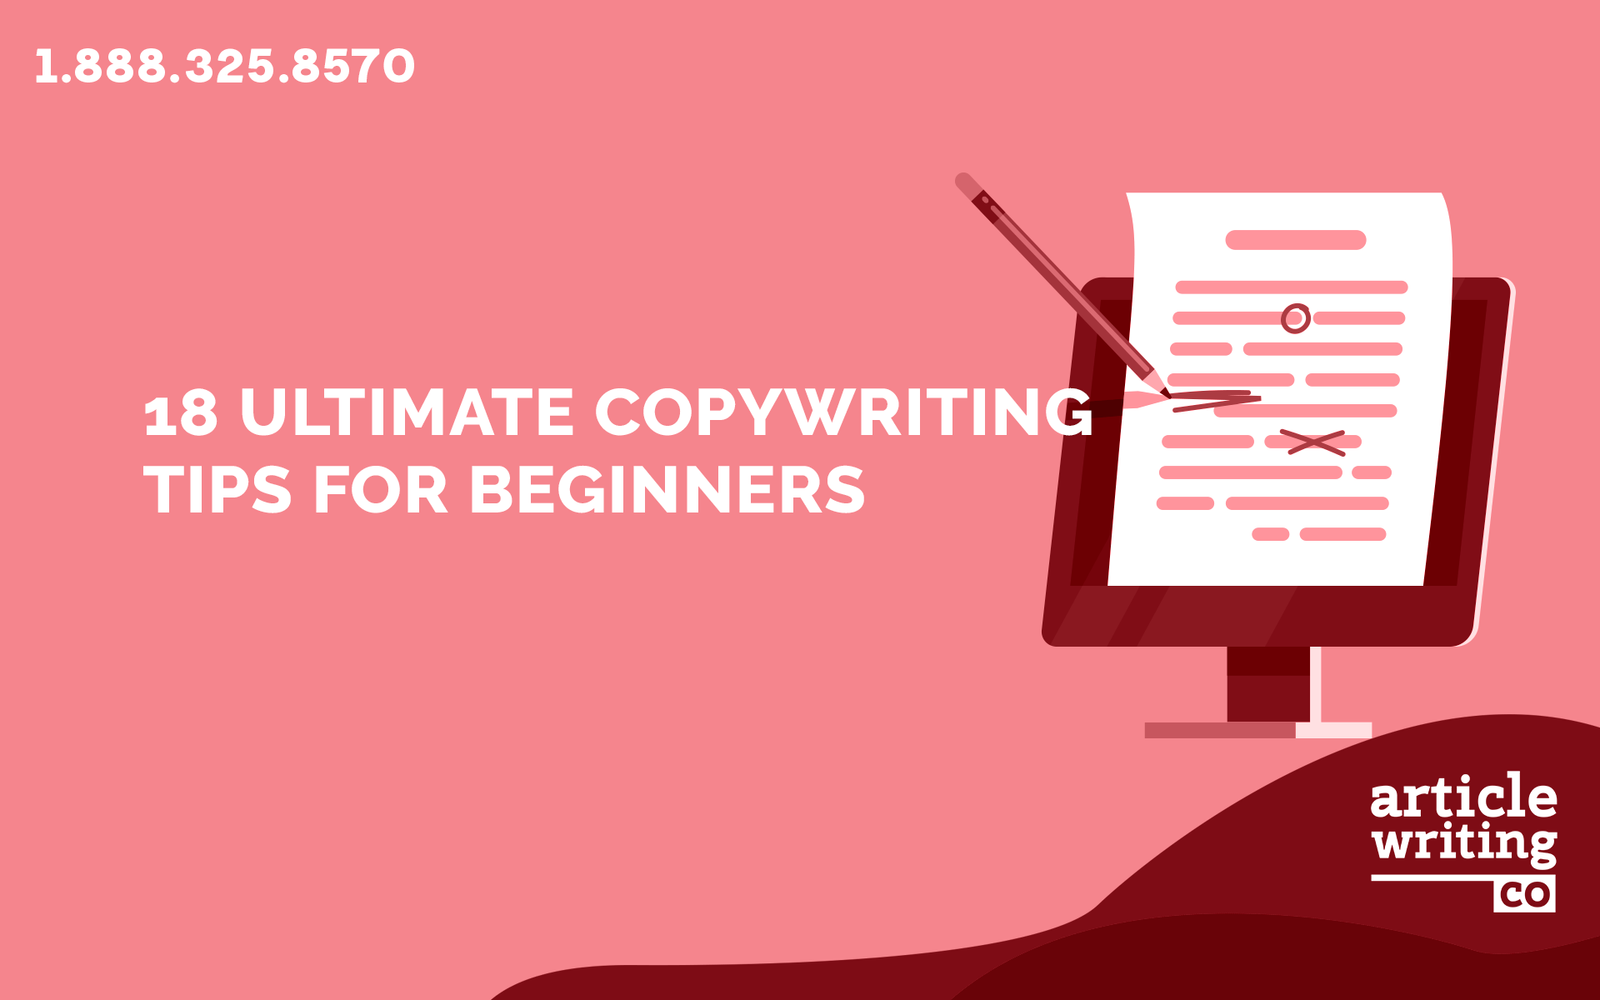 Complete Copywriting Guide for Beginners